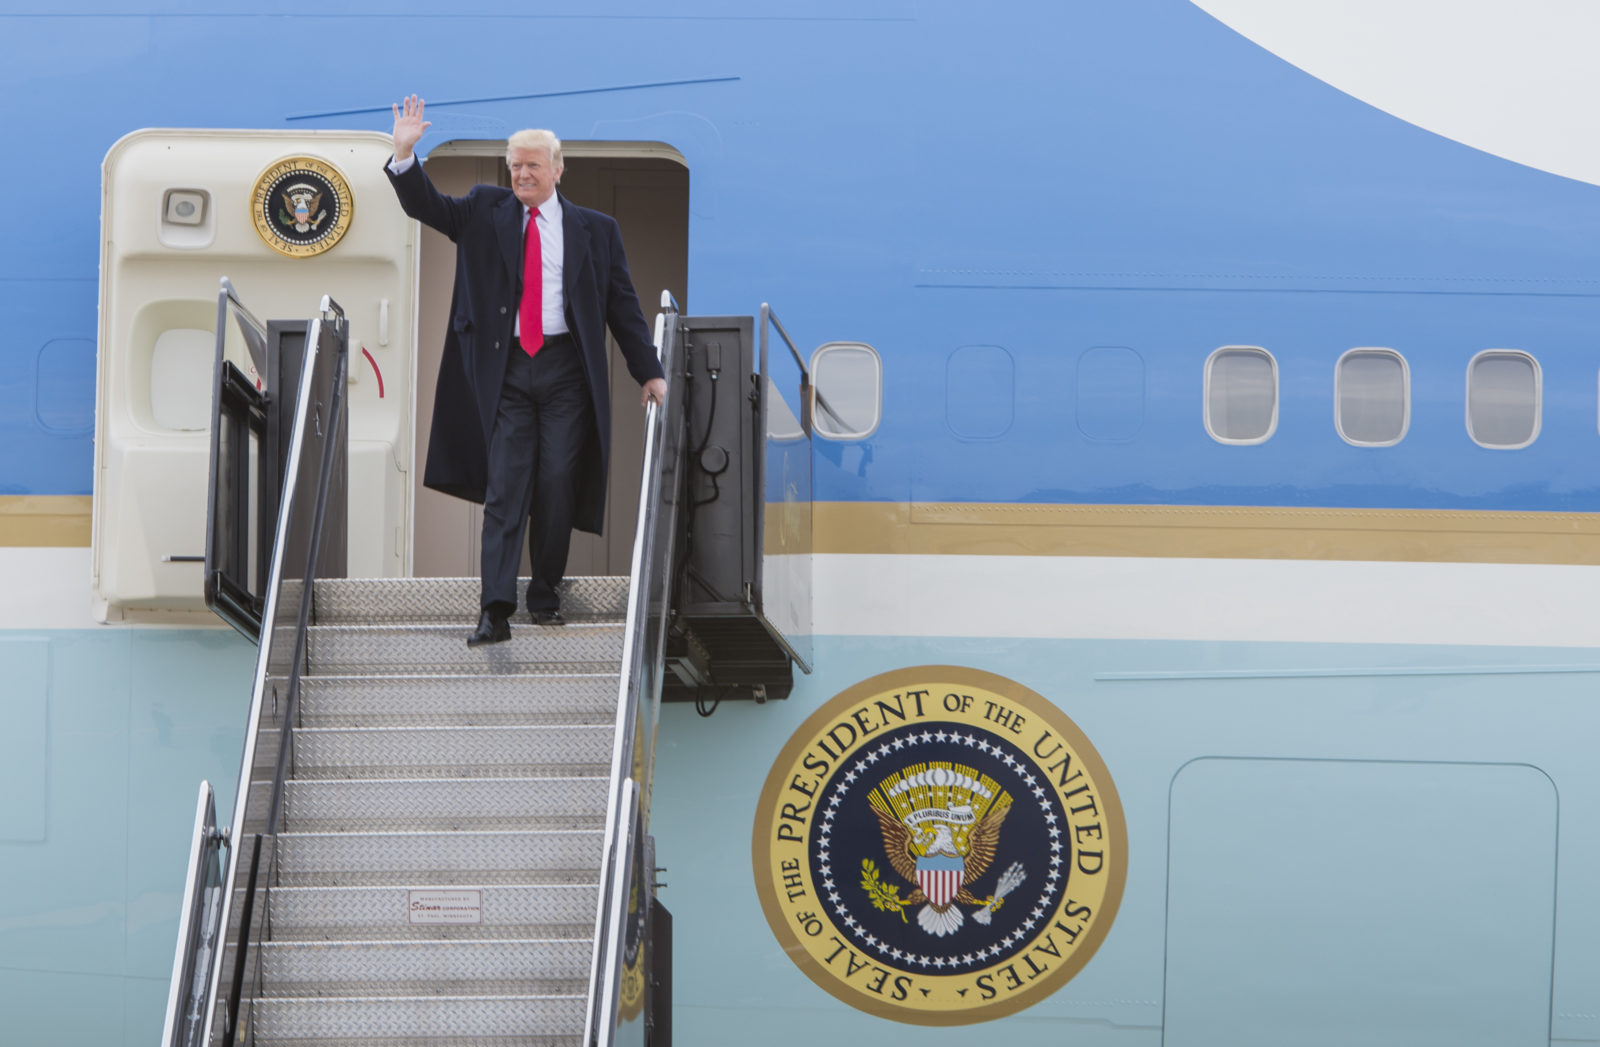 President Donald J. Trump waves to the crowd while exiting Air Force 1 at St. Louis Lambert International Airport Nov. 29, 2017. President Donald J. Trump exits Air Force One in St. Charles, MO.